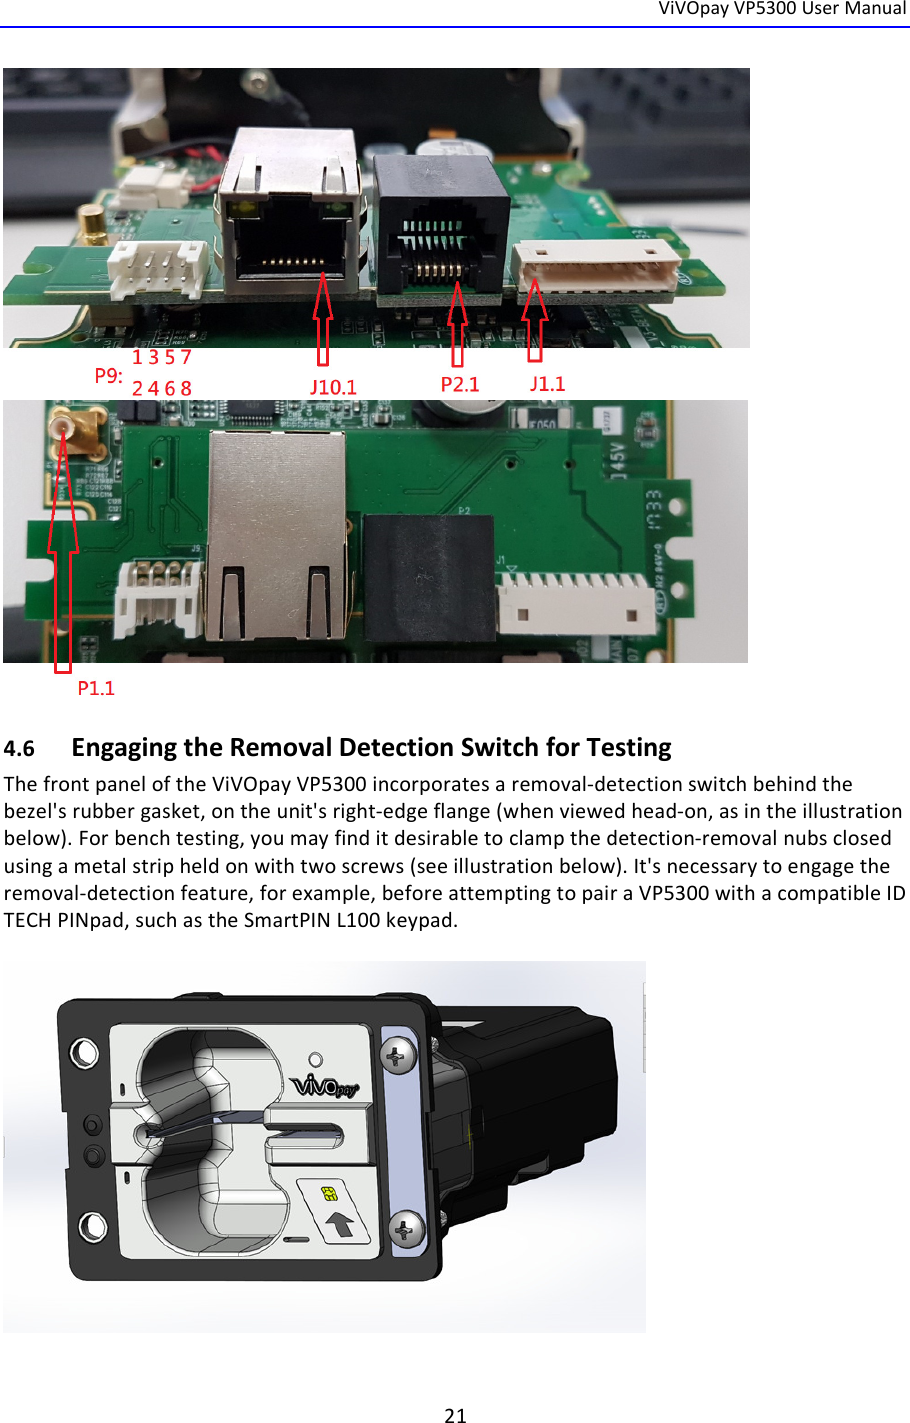  ViVOpay VP5300 User Manual   21    4.6 Engaging the Removal Detection Switch for Testing The front panel of the ViVOpay VP5300 incorporates a removal-detection switch behind the bezel&apos;s rubber gasket, on the unit&apos;s right-edge flange (when viewed head-on, as in the illustration below). For bench testing, you may find it desirable to clamp the detection-removal nubs closed using a metal strip held on with two screws (see illustration below). It&apos;s necessary to engage the removal-detection feature, for example, before attempting to pair a VP5300 with a compatible ID TECH PINpad, such as the SmartPIN L100 keypad.    